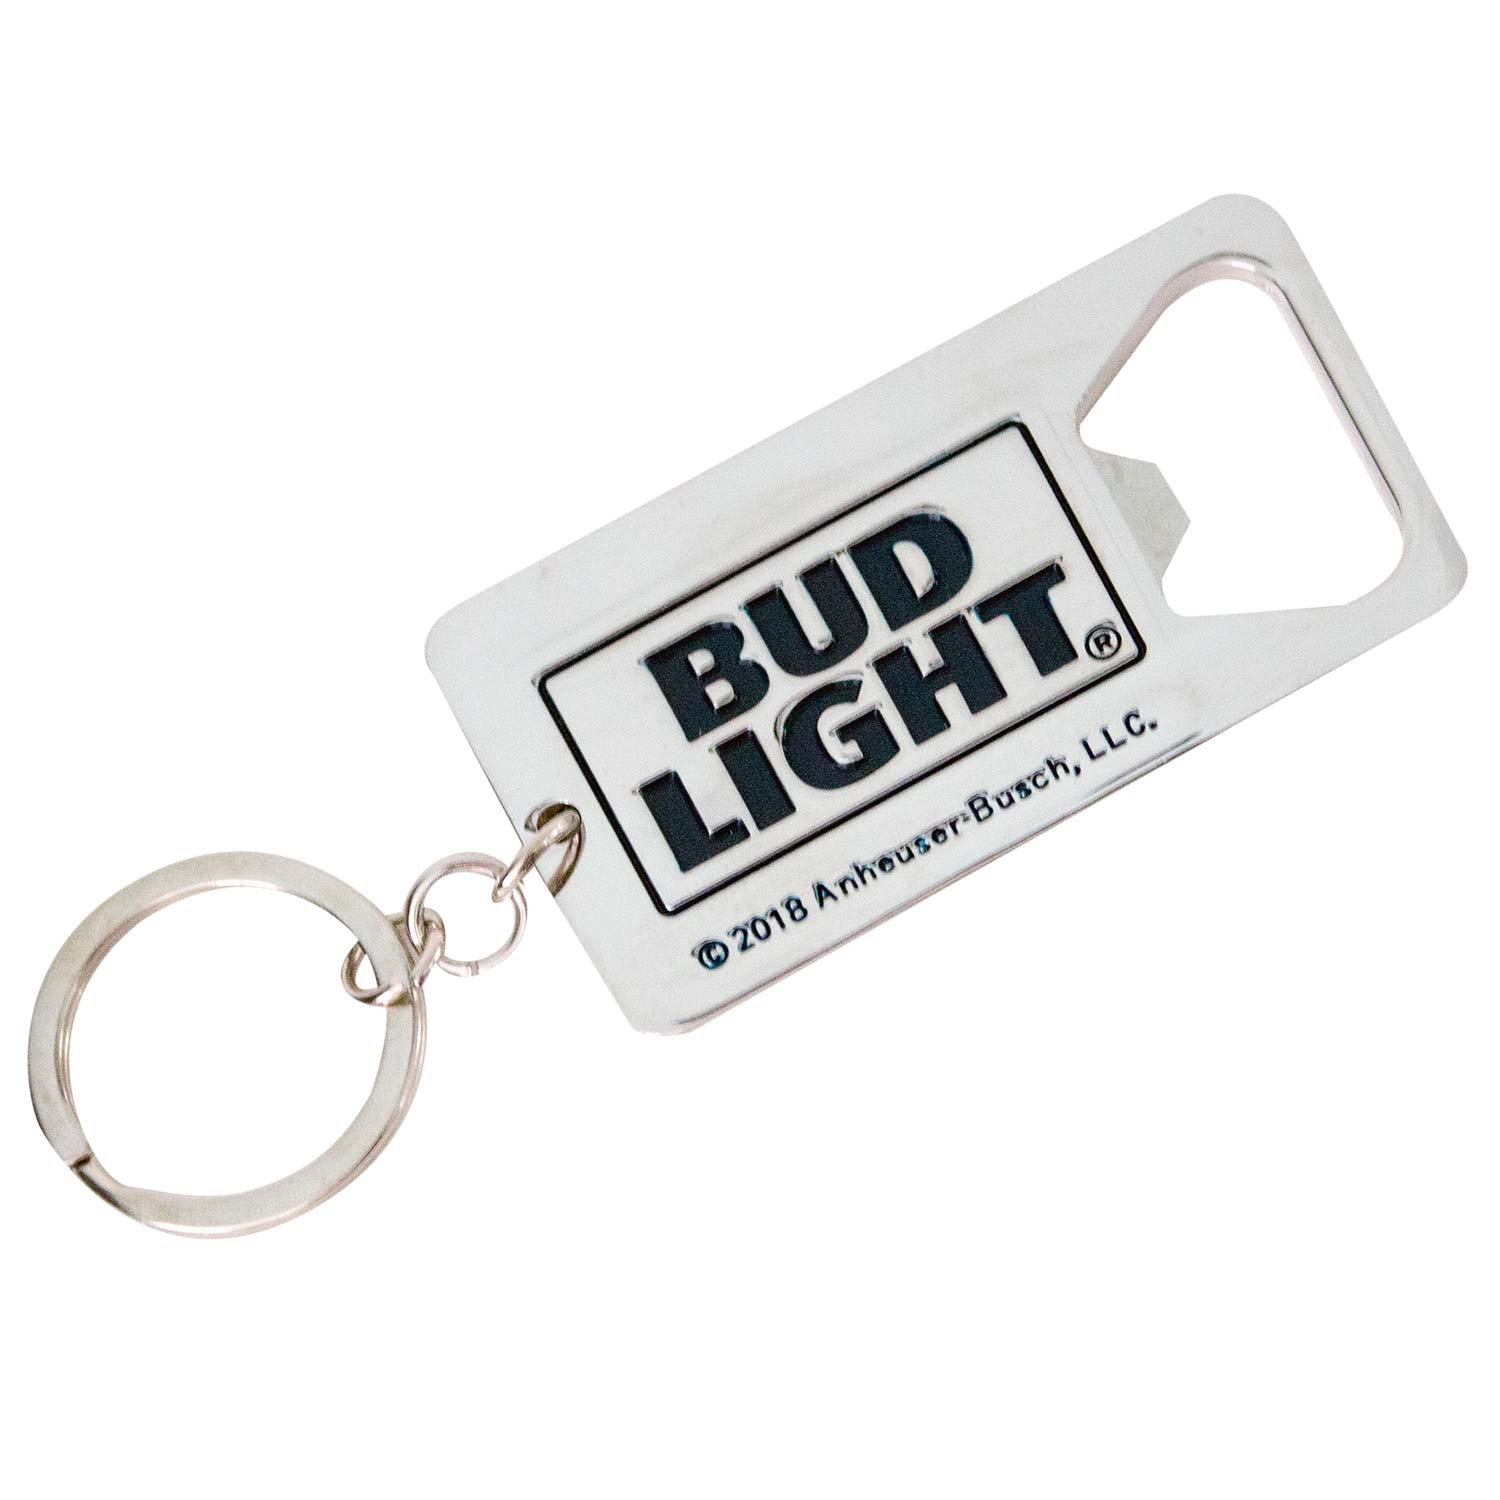 Details about   BUDWEISER BUD MAN PEACE SIGN Beer Can Bottle Cap Opener Key Chain Key Ring 